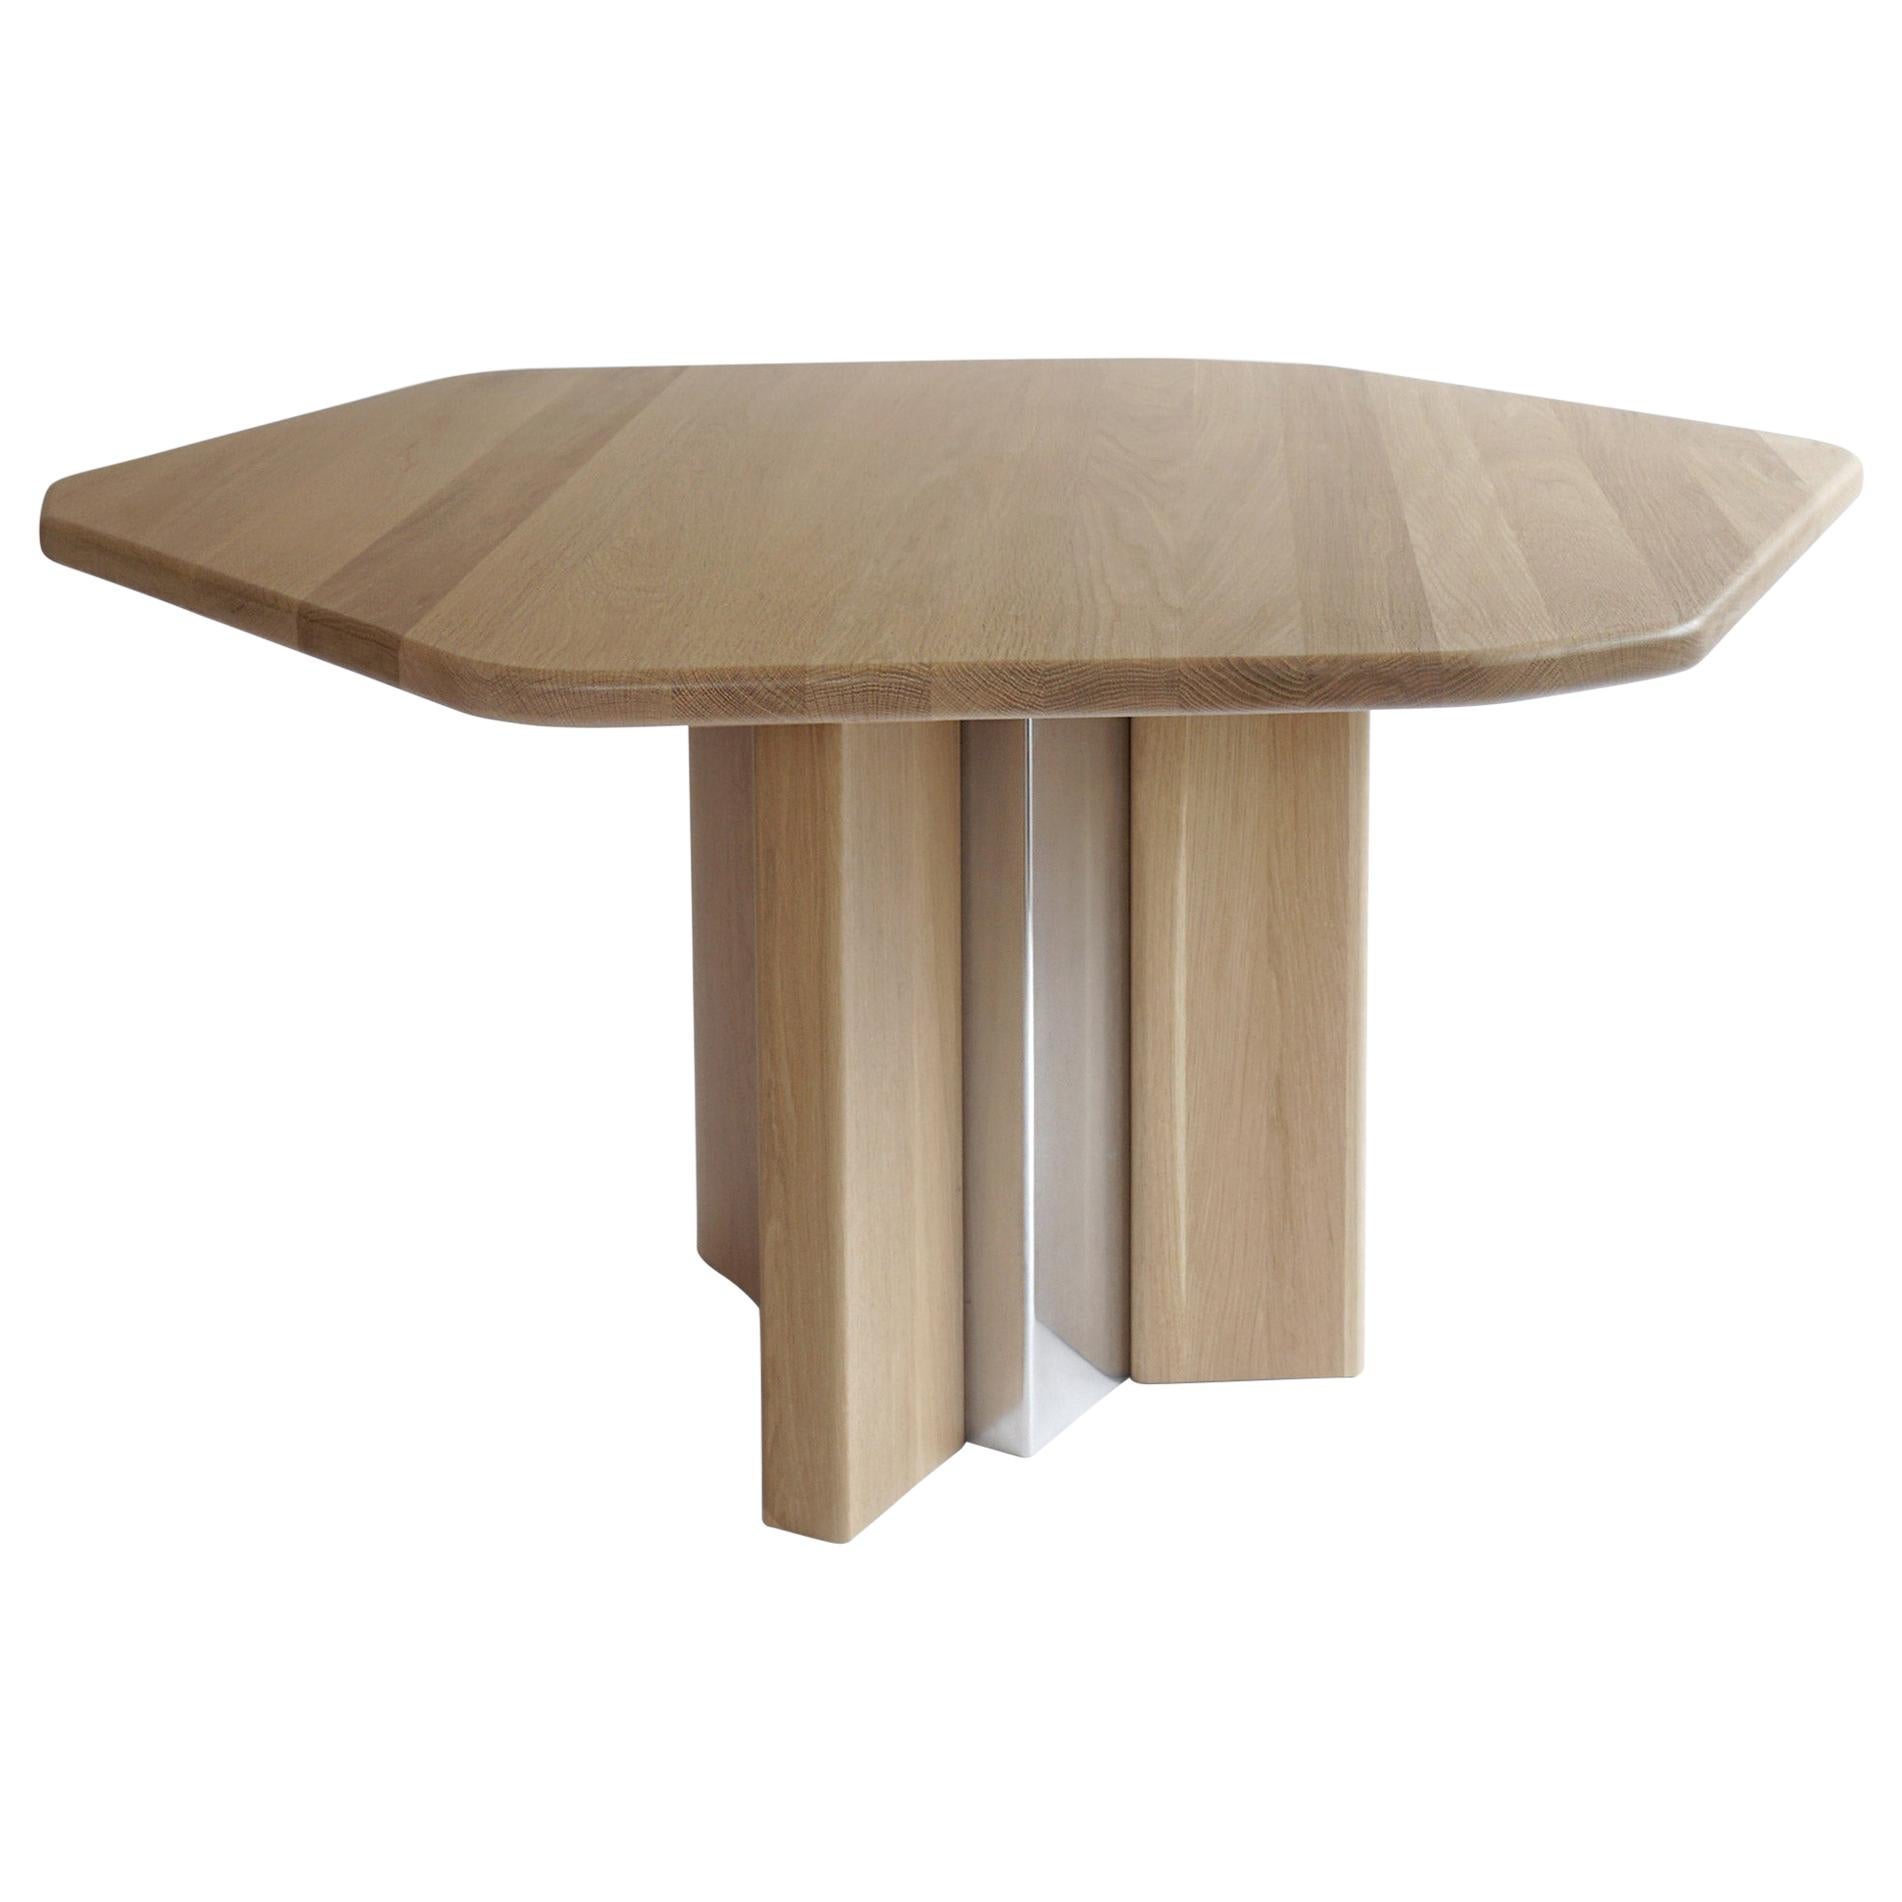 Hex Diamond Table in White Oak and Aluminum by Simon Johns For Sale